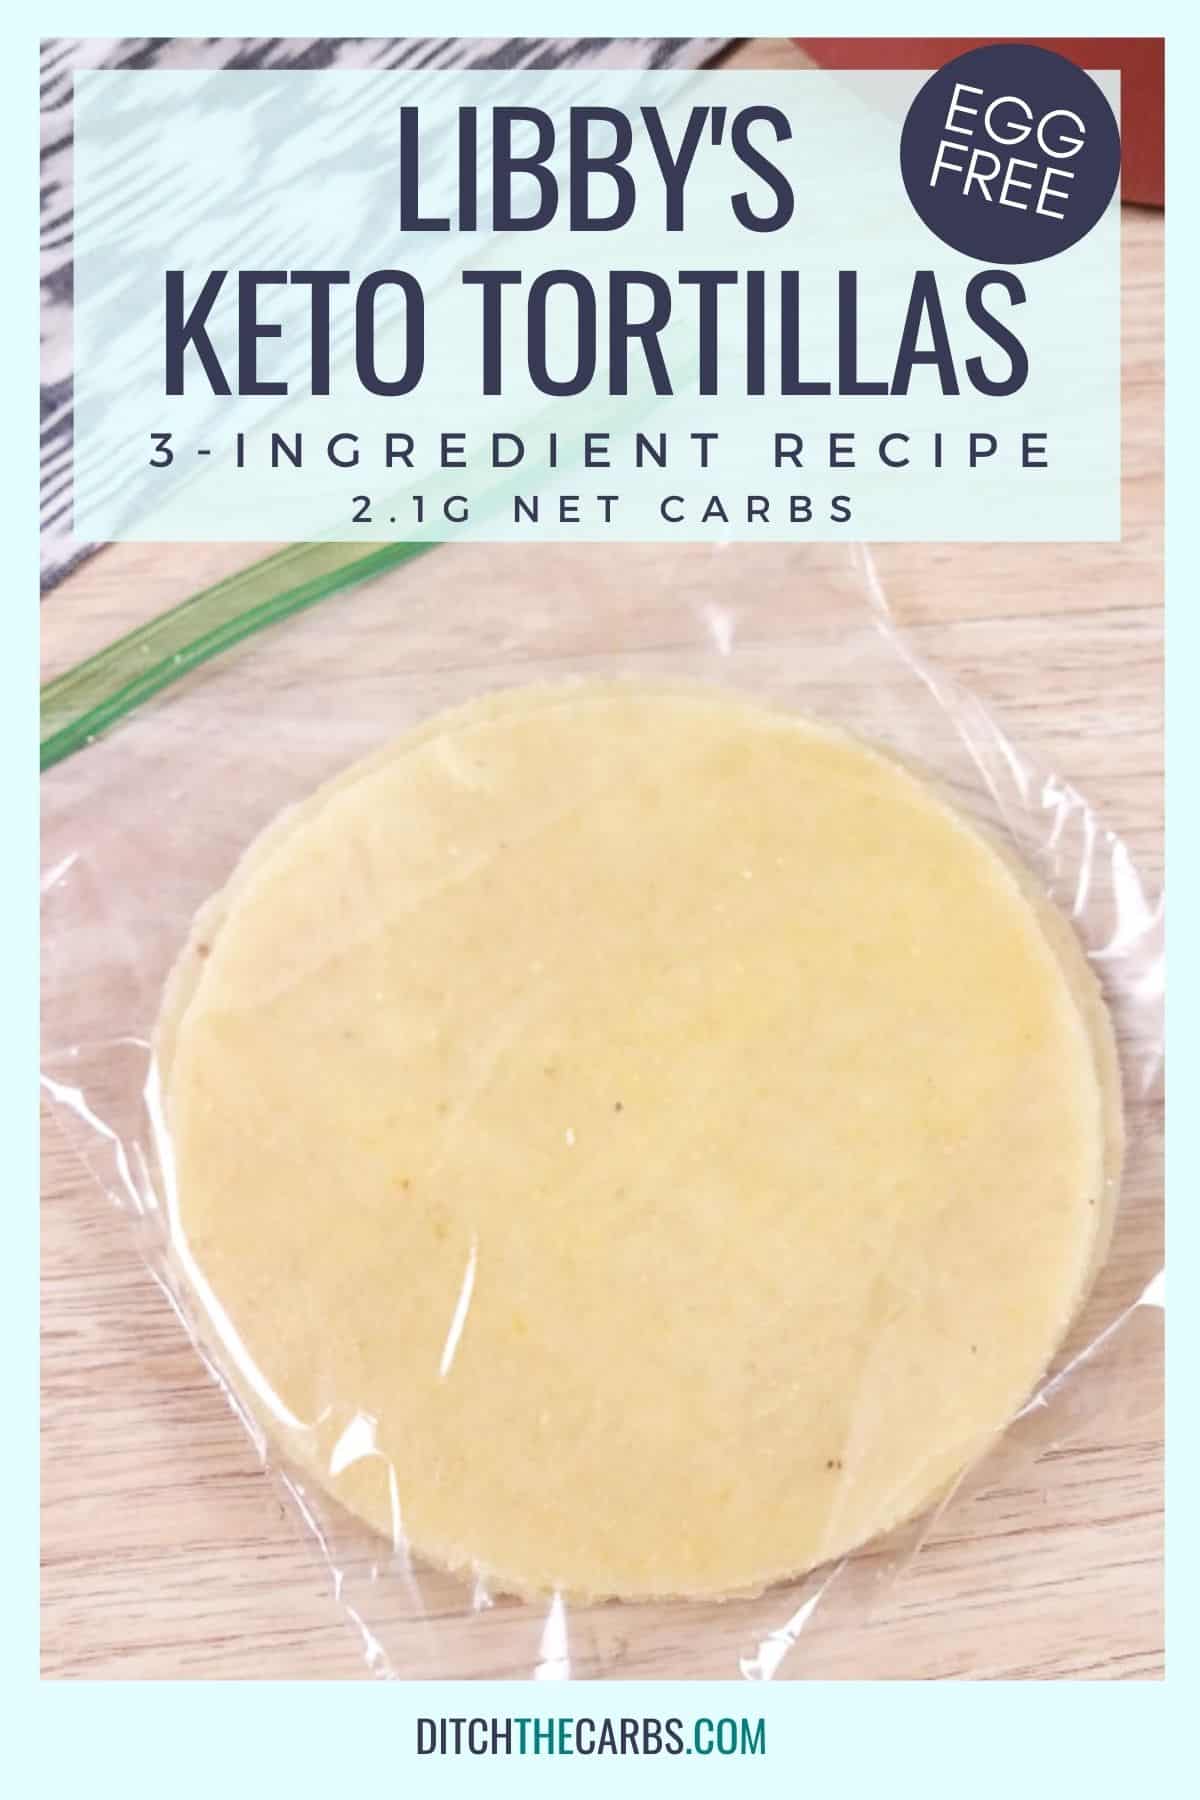 Uncooked Keto Tortillas in a plastic zipped bag ready to be stored in the refrigerator.